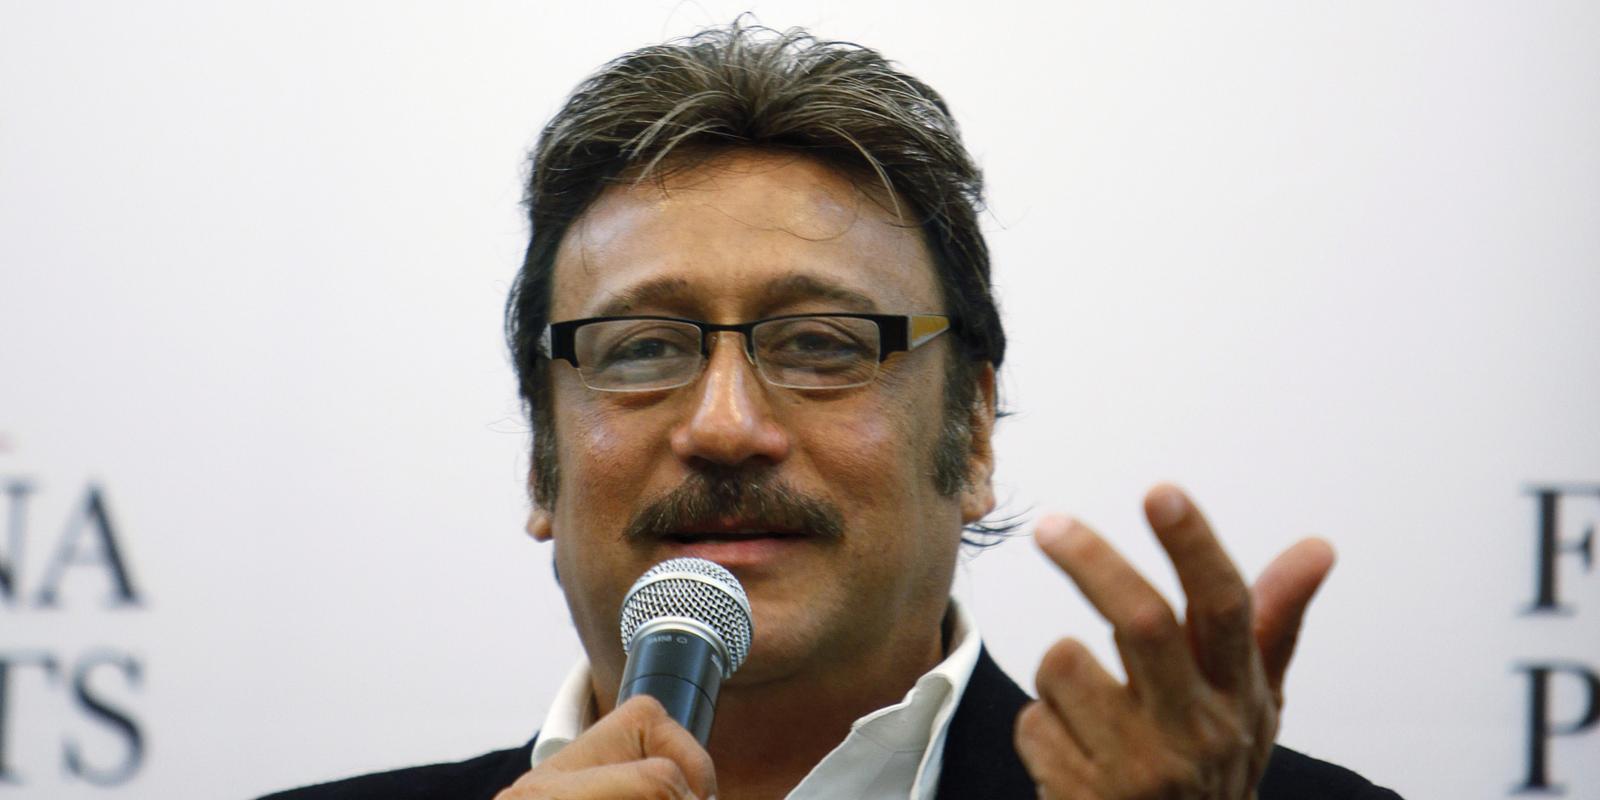 Jackie Shroff Net Worth 2018 In Indian Rupees